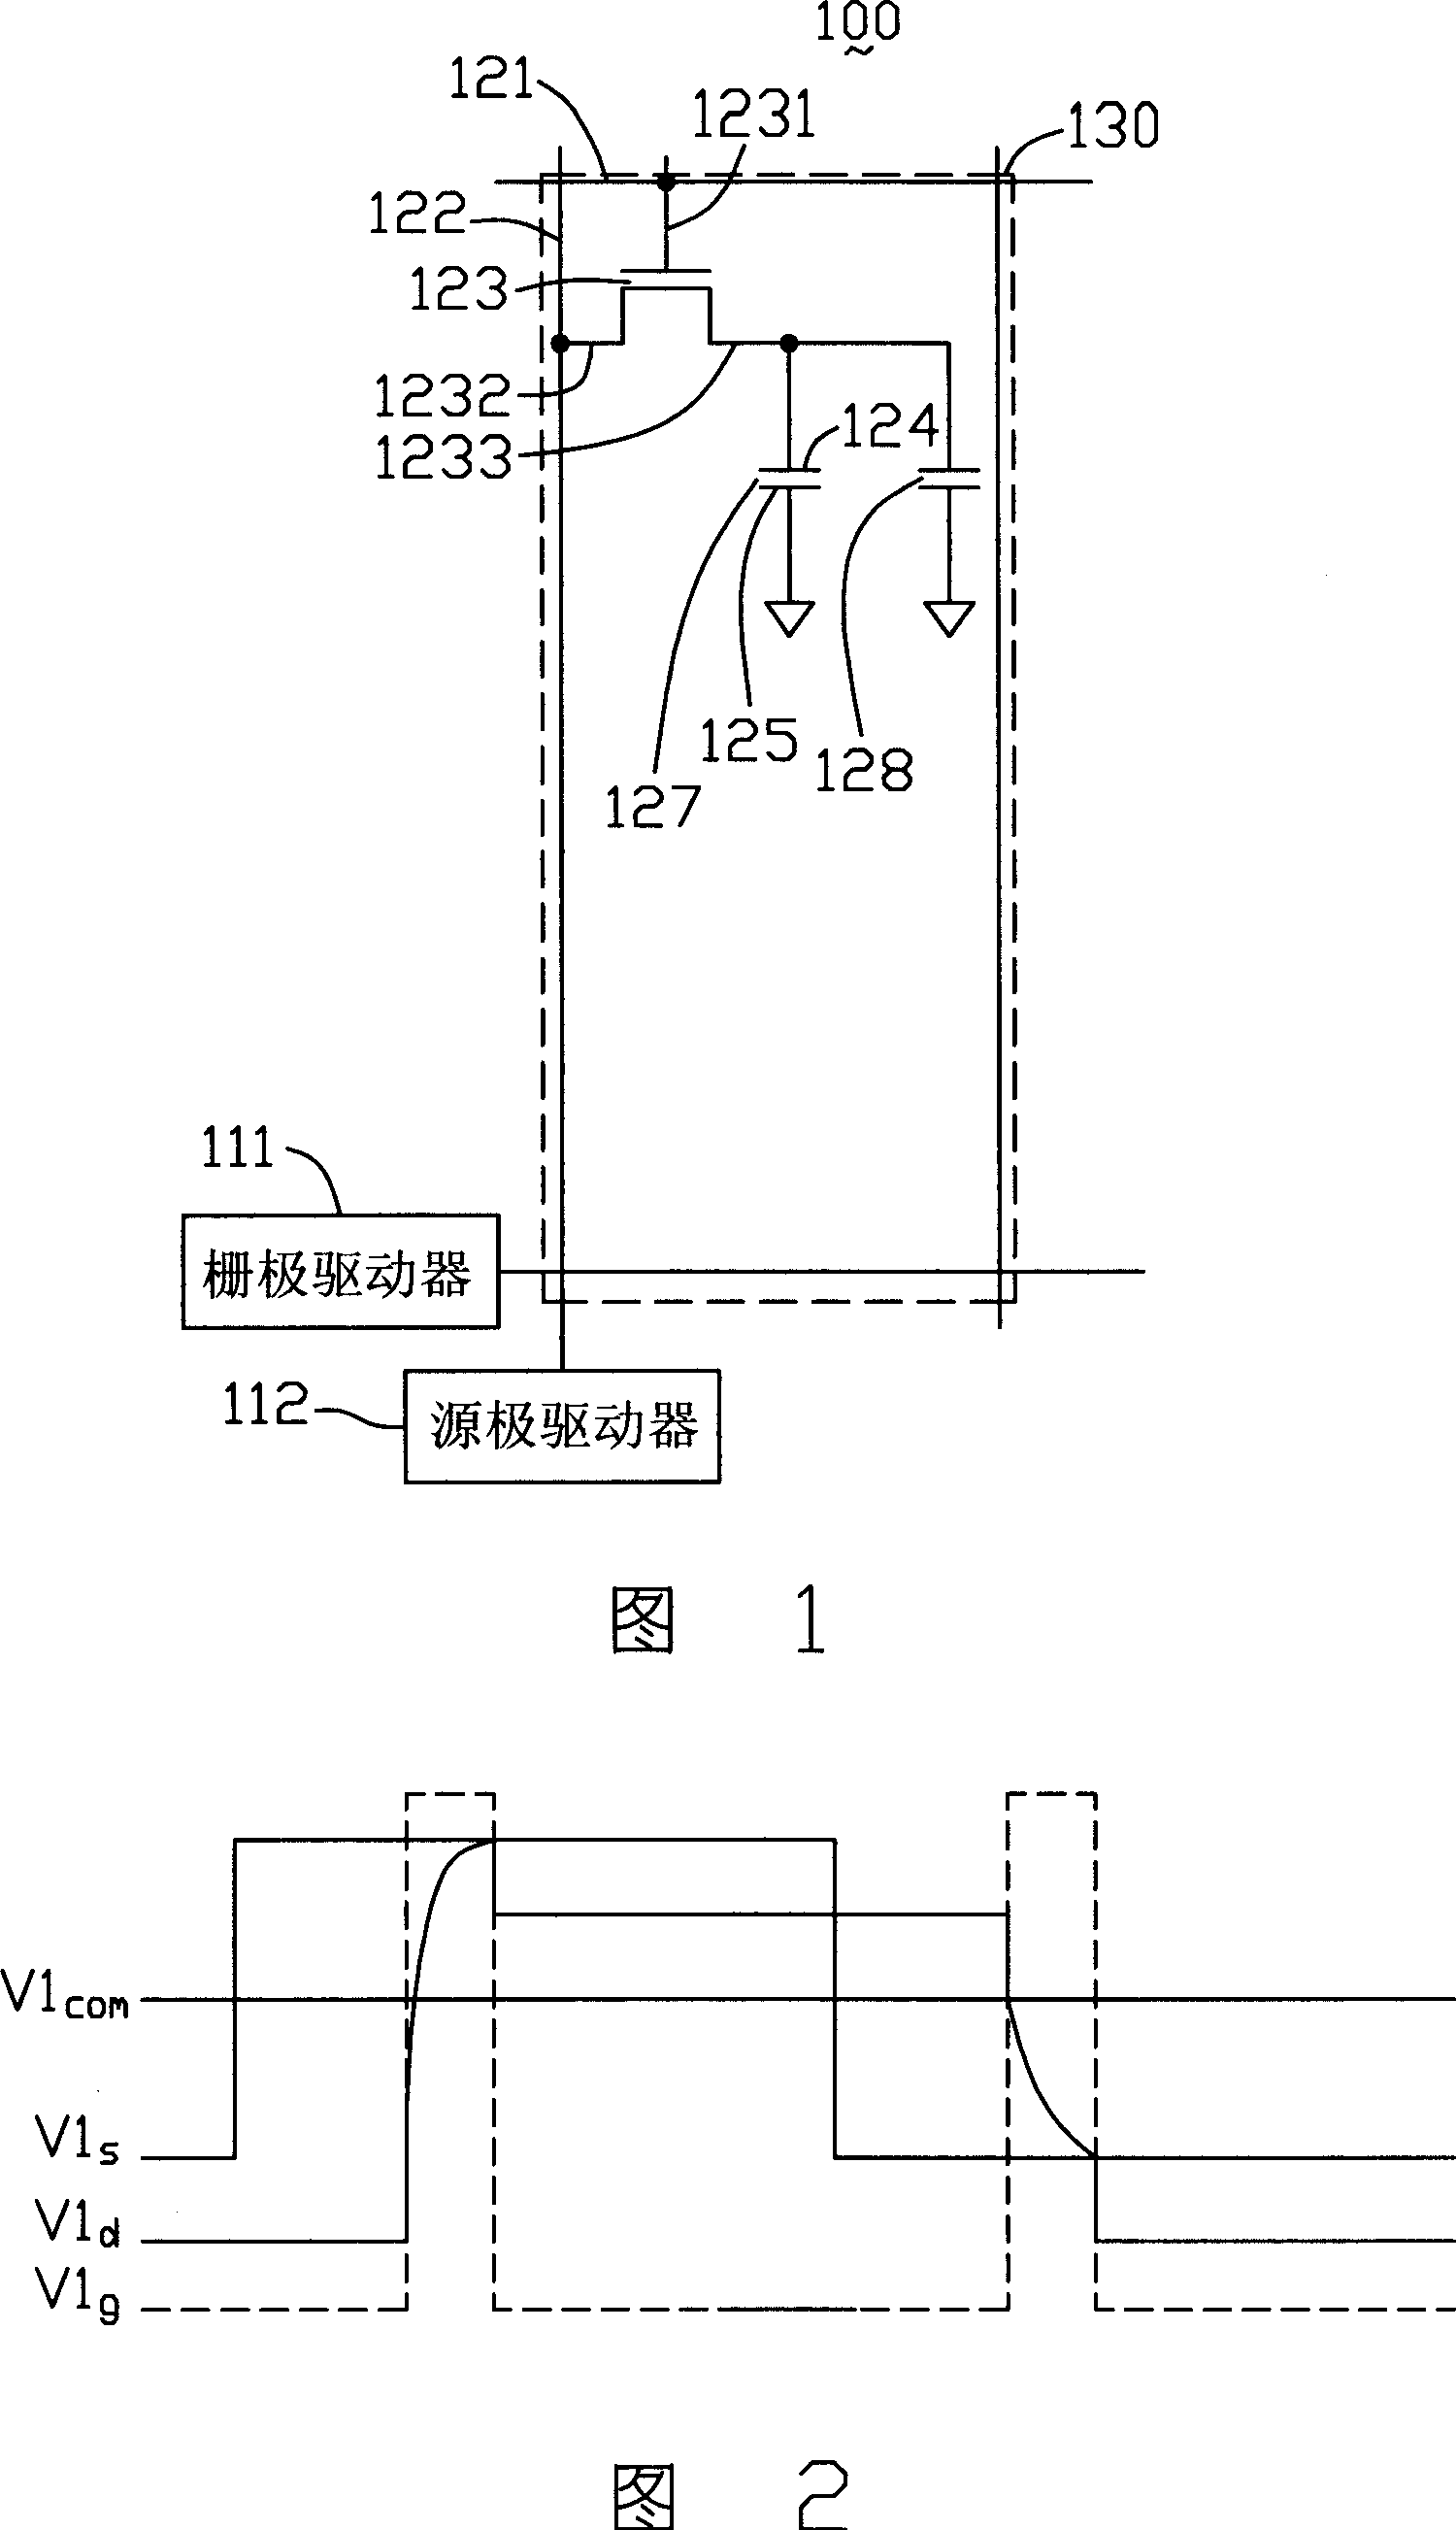 Liquid crystal display and its compensating feed through voltage method